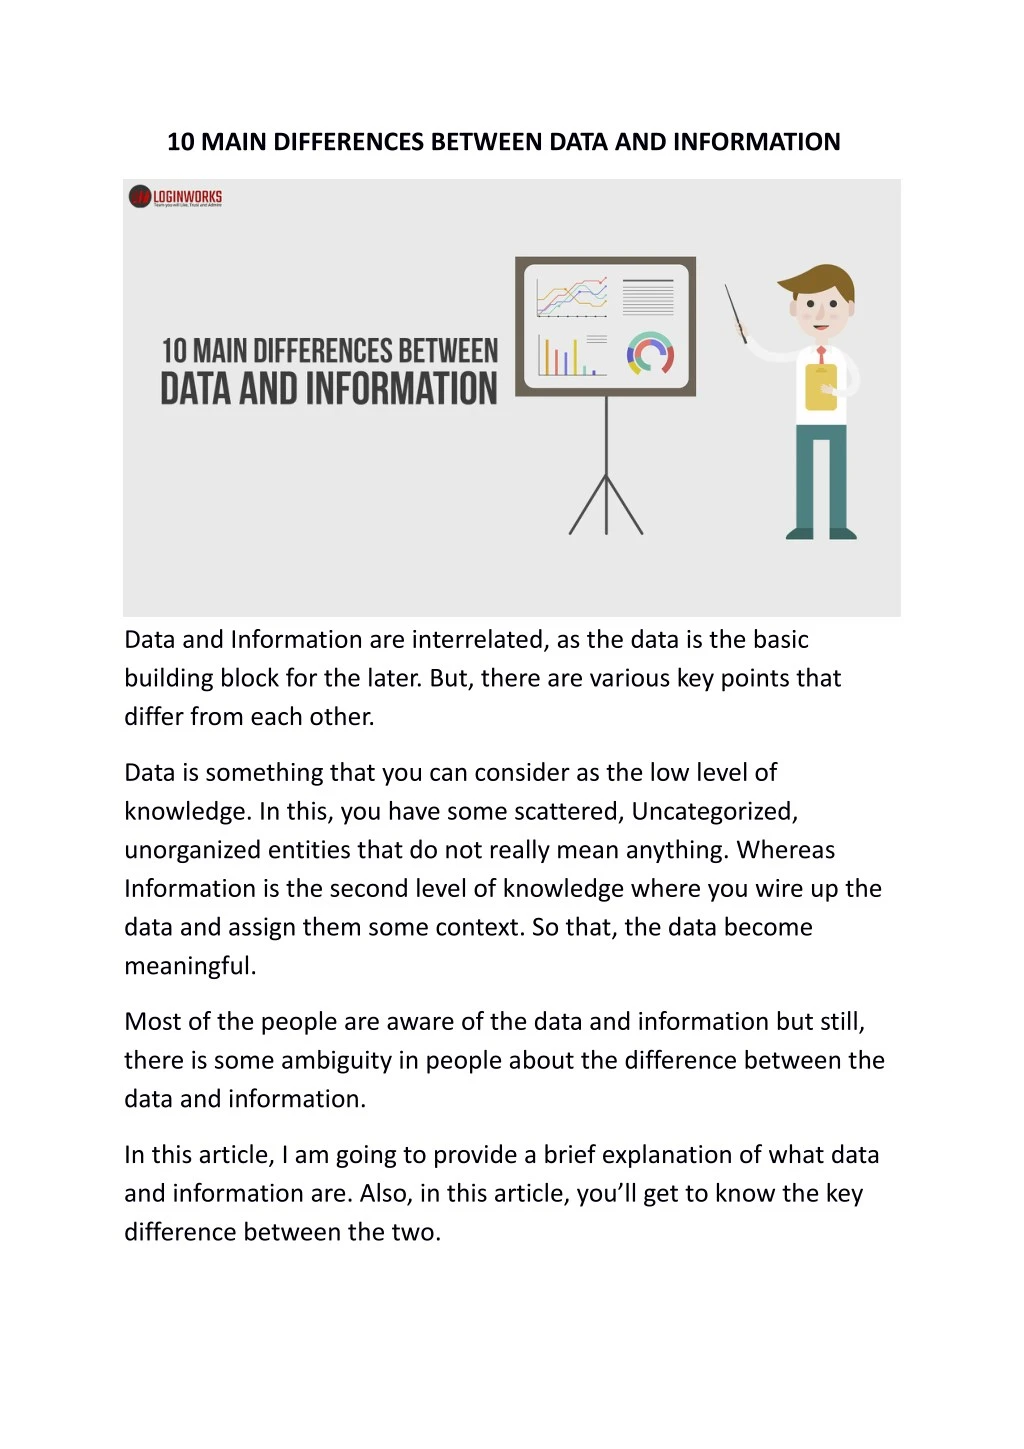 10 main differences between data and information